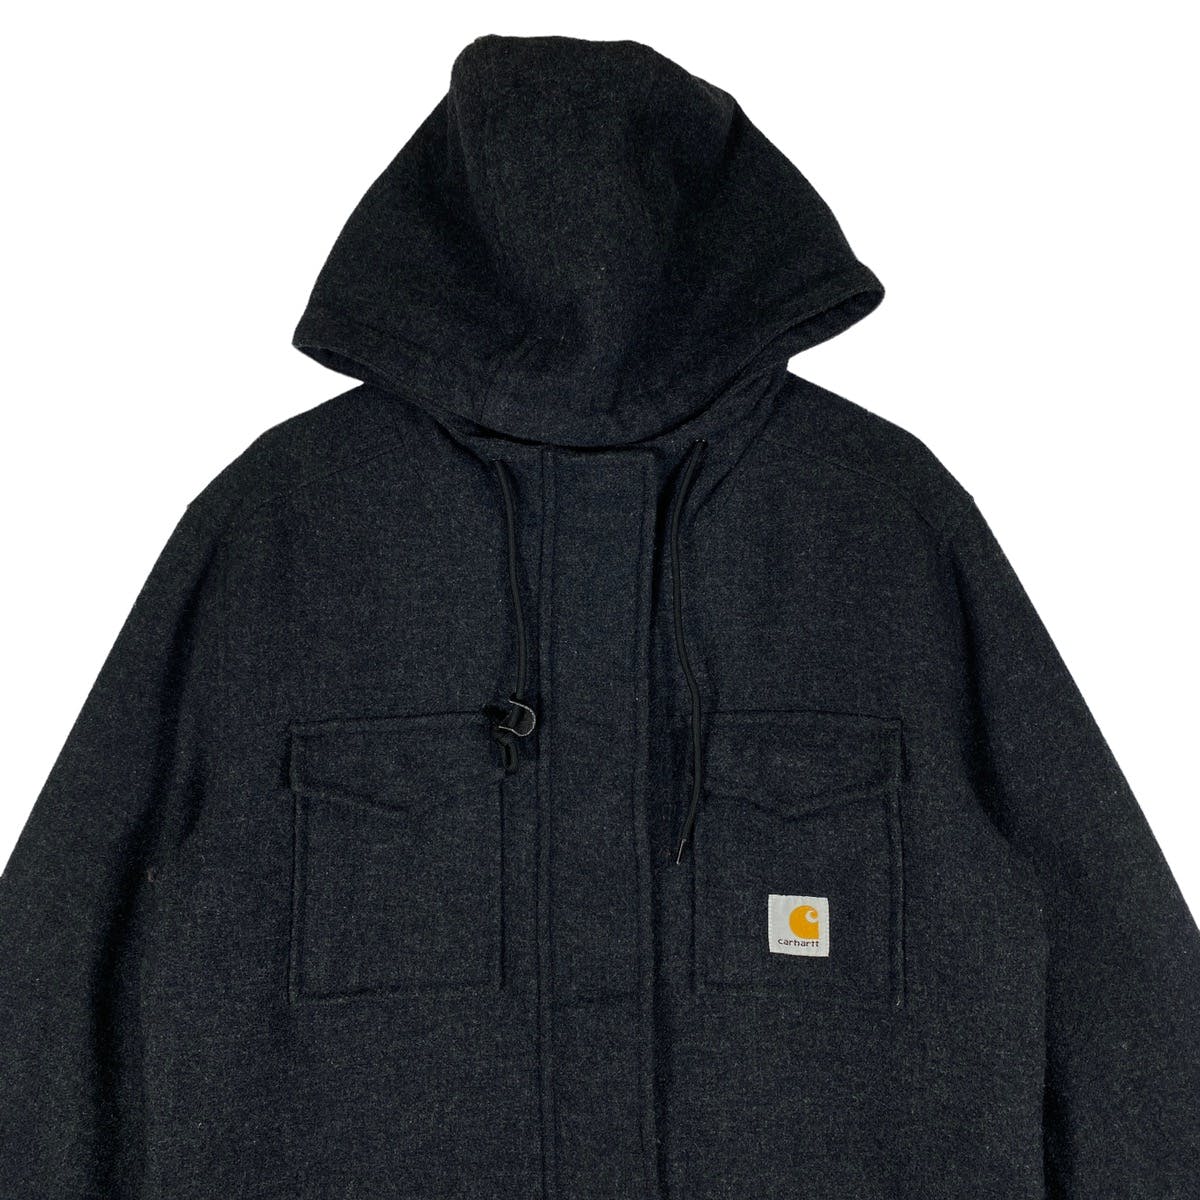 Carhartt For Women Quilted Lined Wool Hoodie Jacket - 5